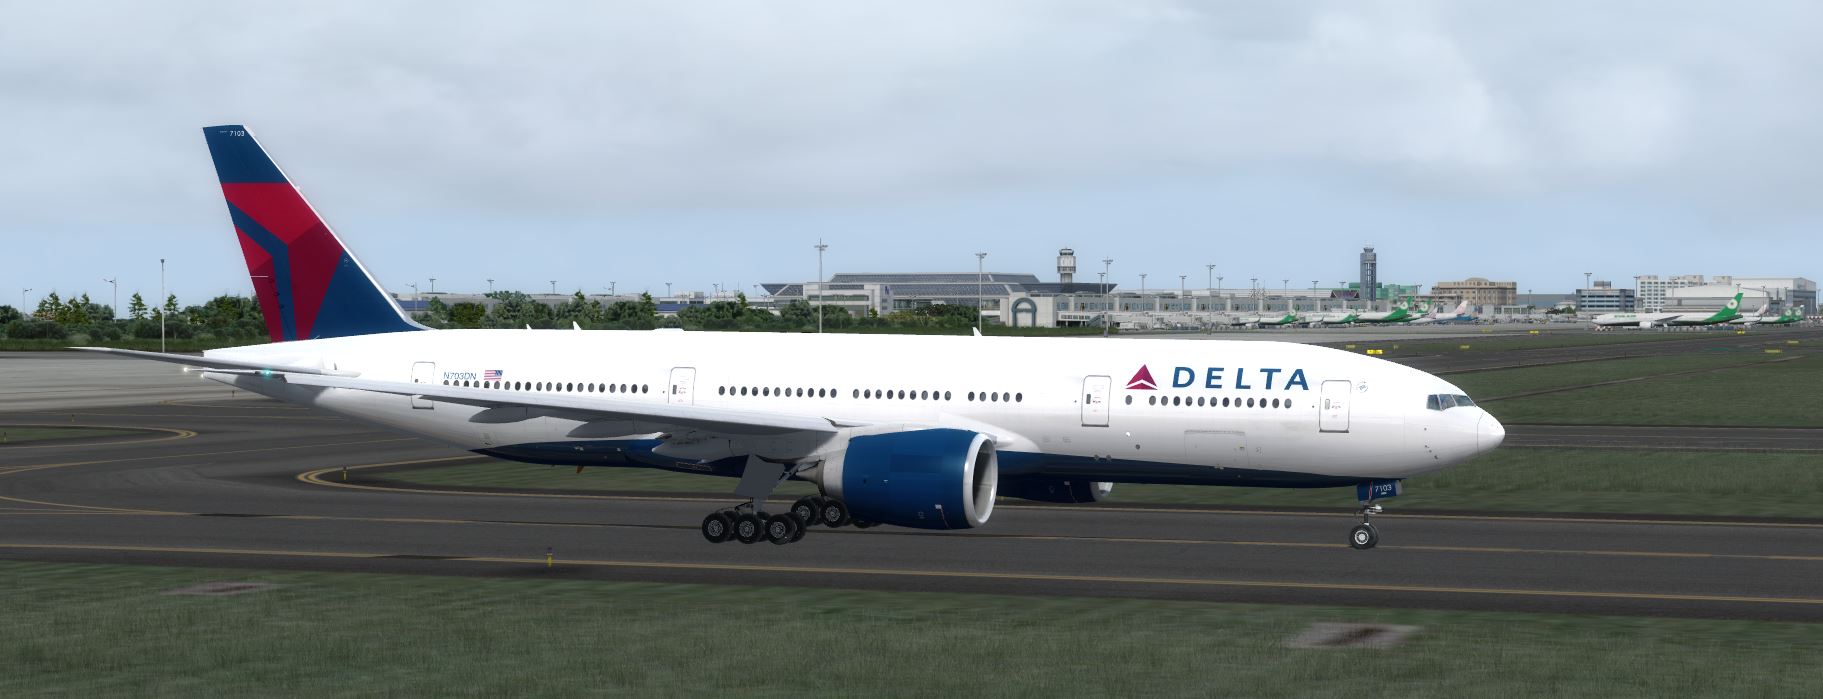 B777-200 Delta Airlines Standard Livery-4377 